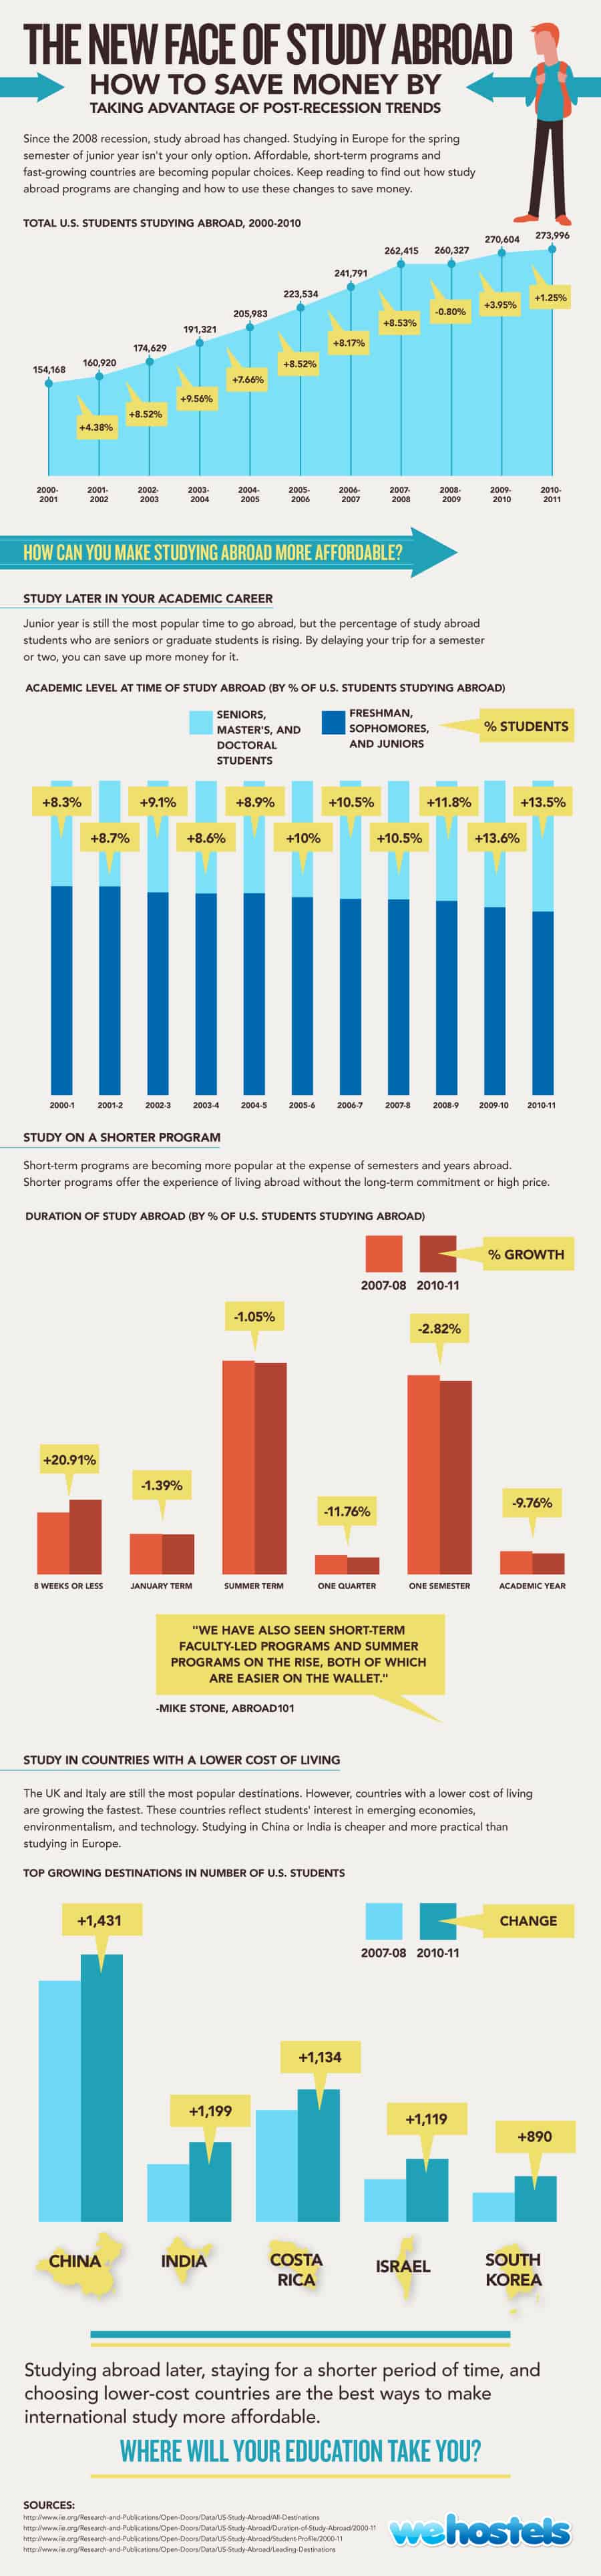 study-abroad-infographic2.jpg